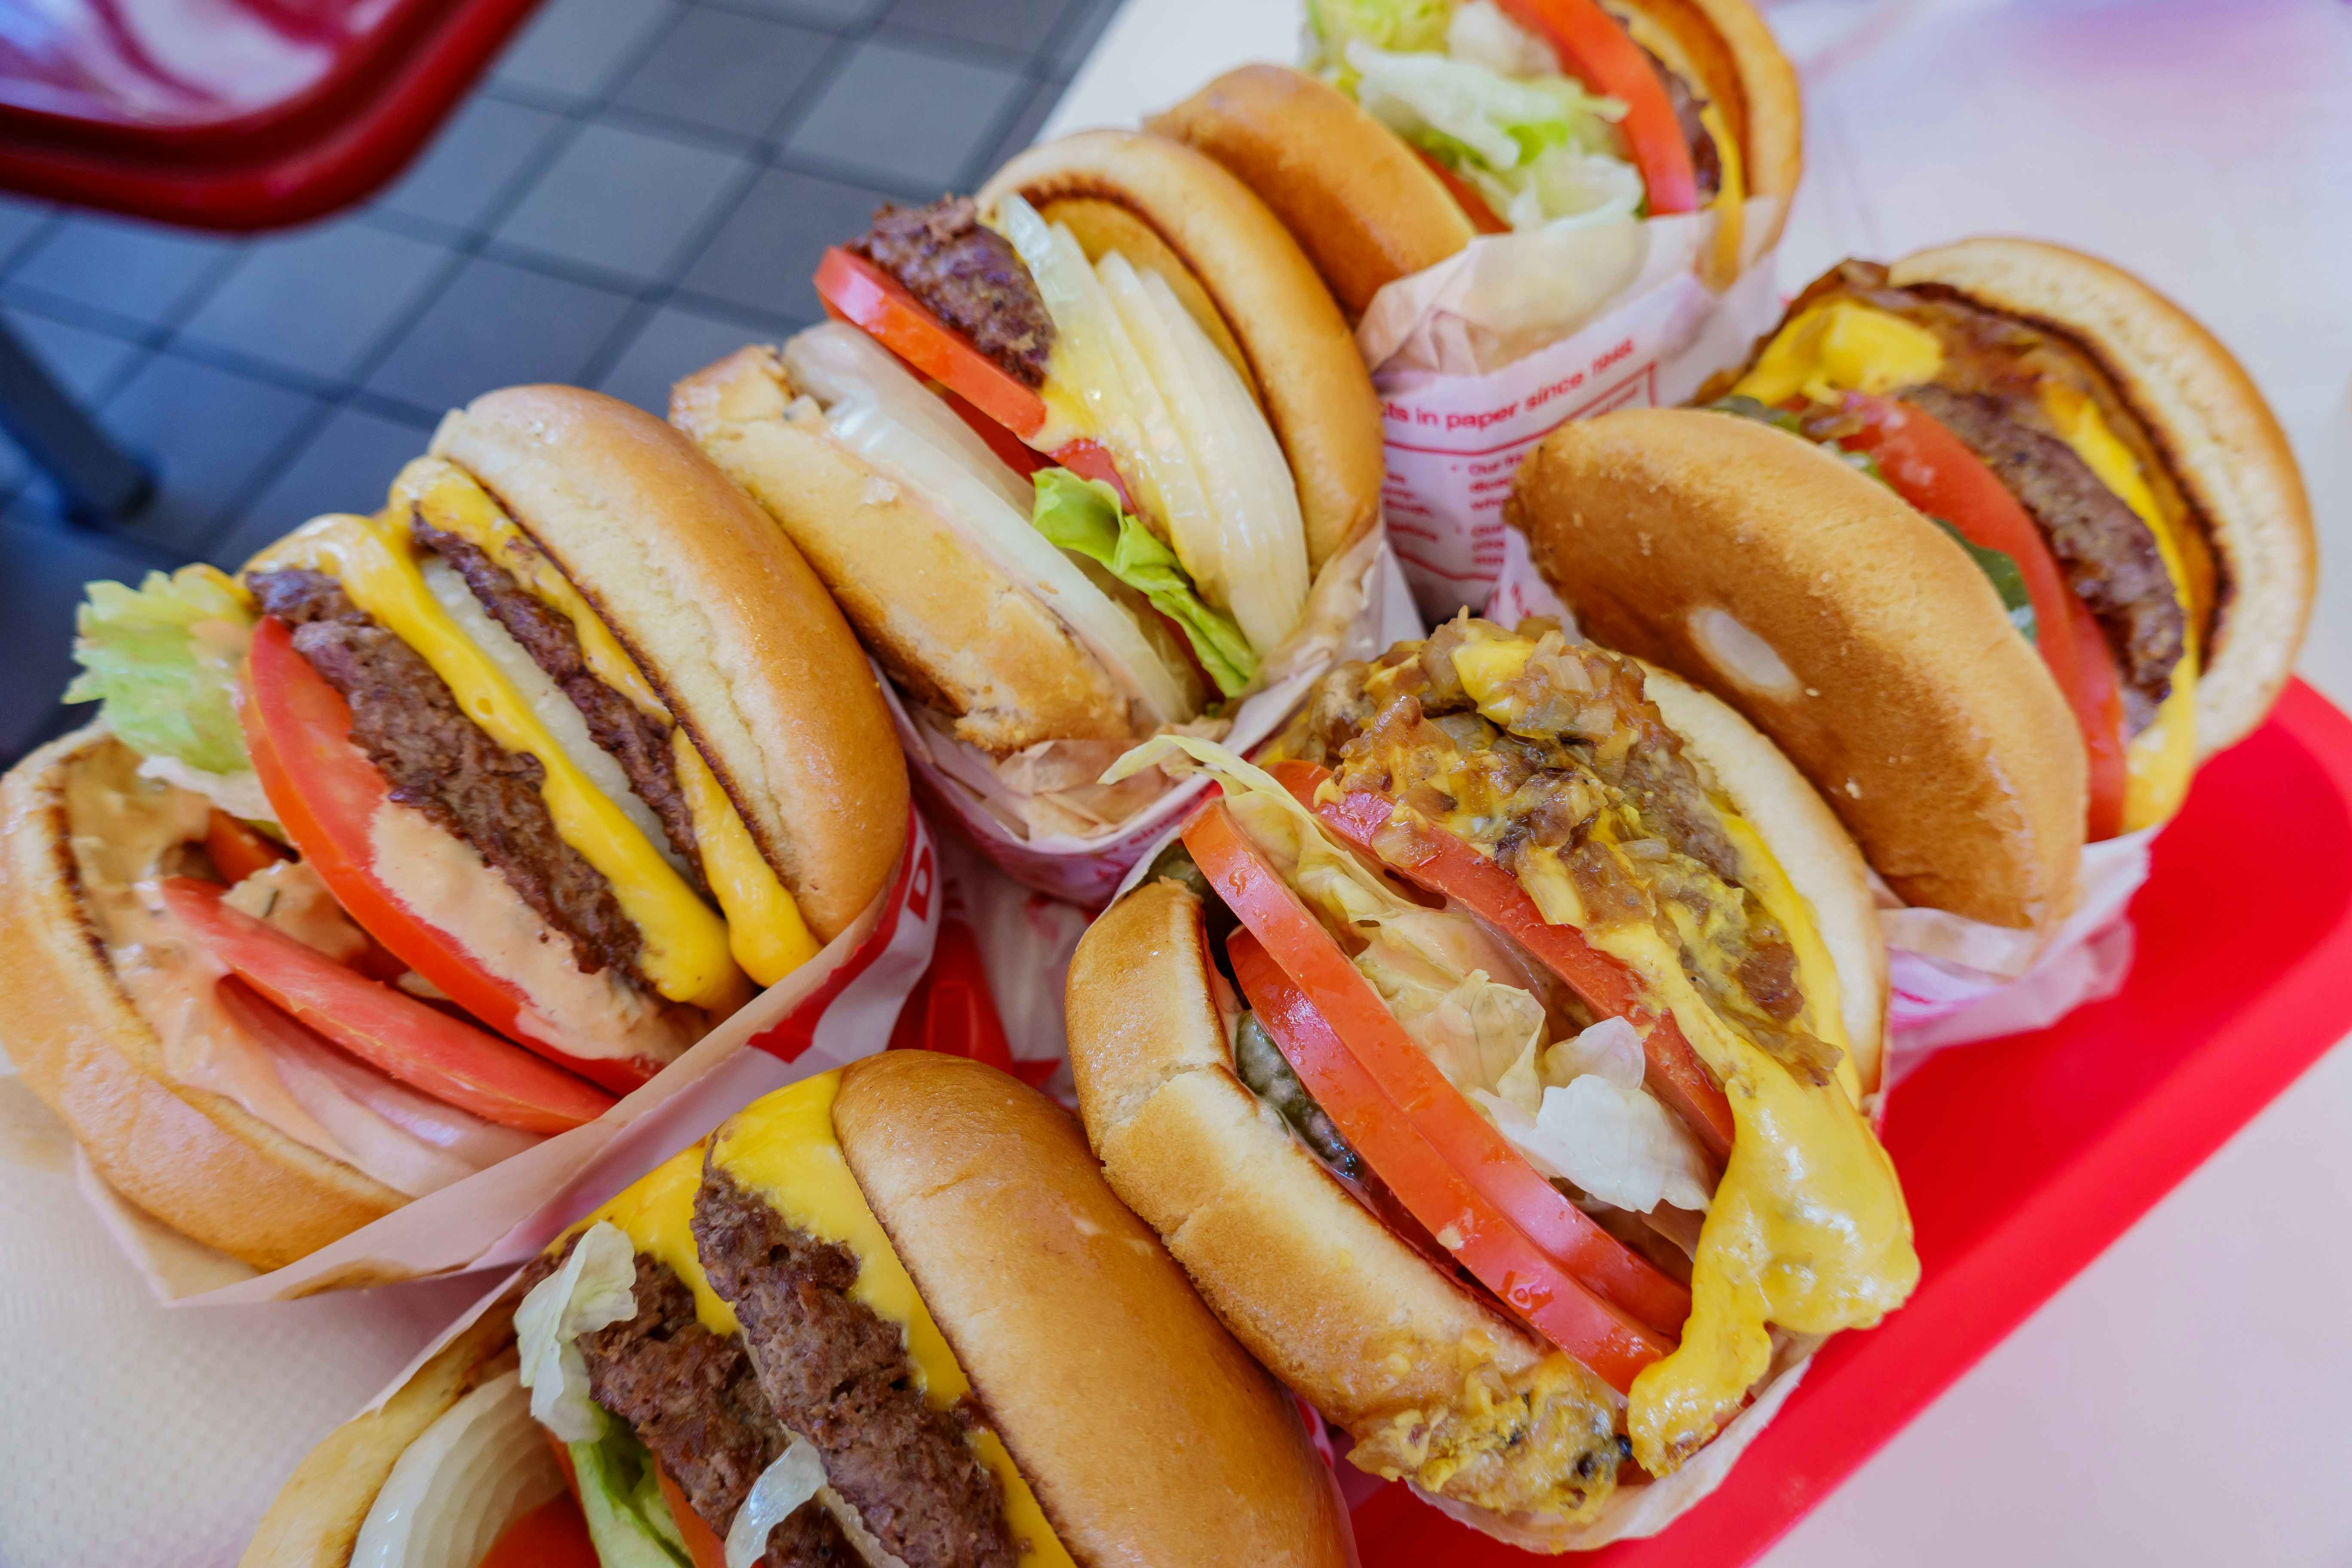 A tray with six In-N-Out burgers on it.